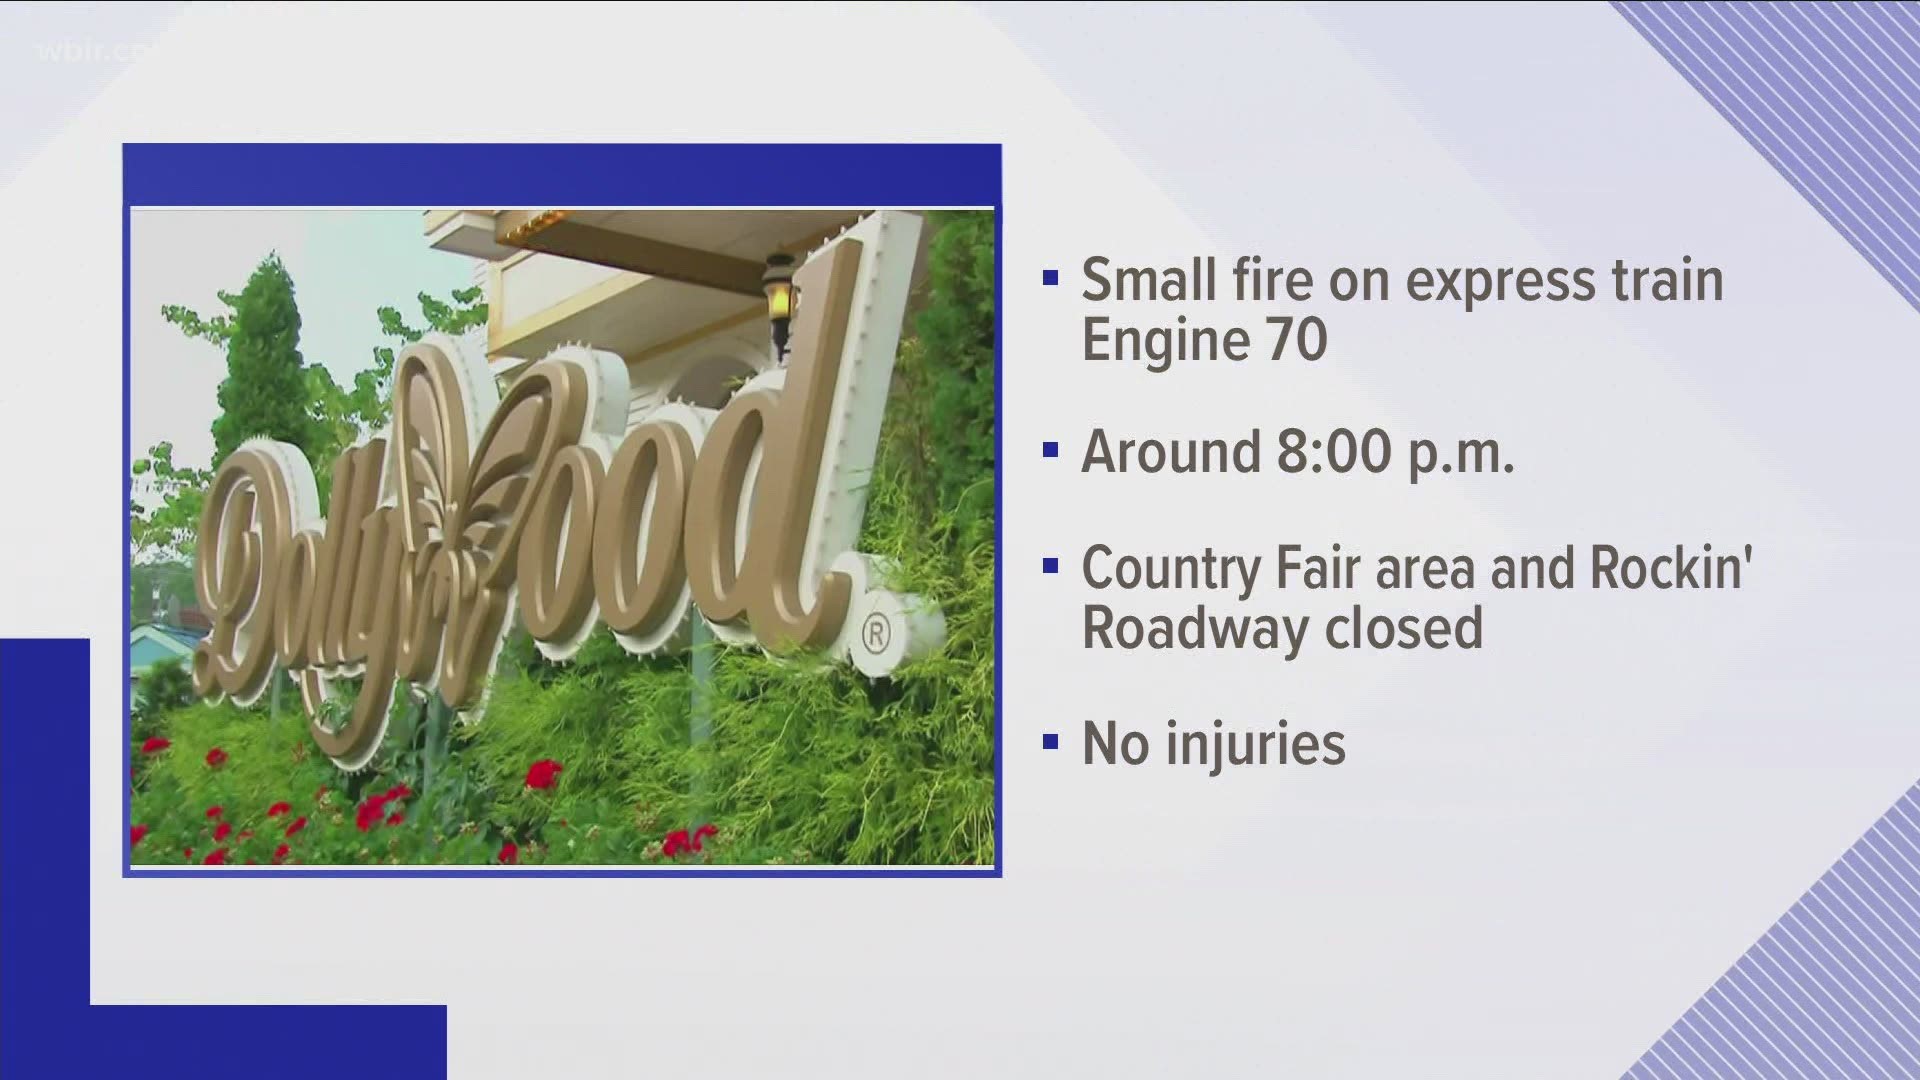 Some people were evacuated from the Country Fair area of the park and the Rockin' Roadway attraction was closed.